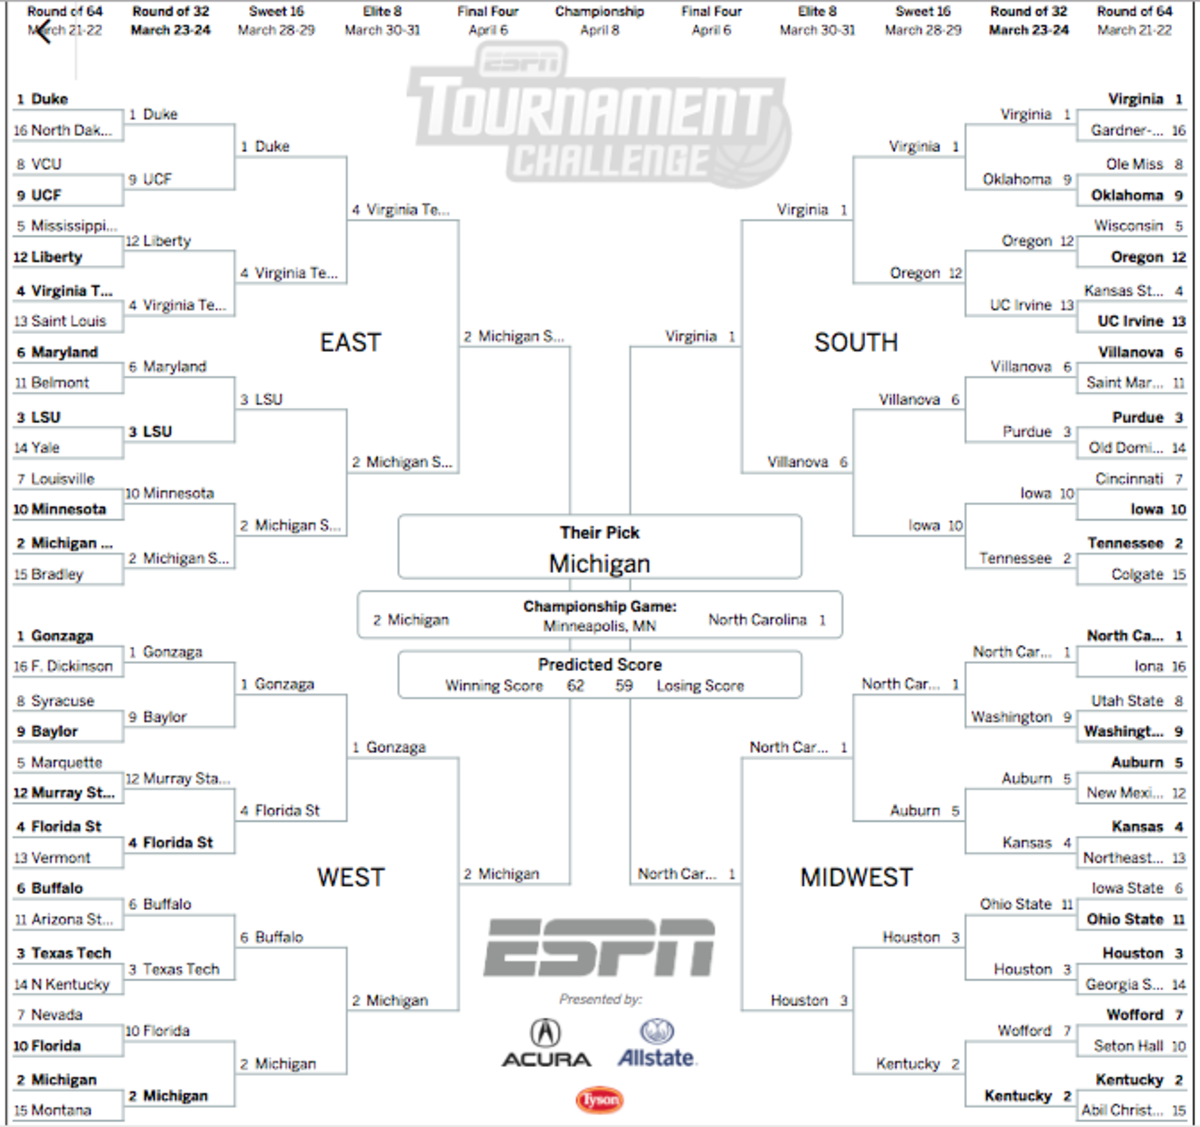 The only perfect bracket left on ESPN.